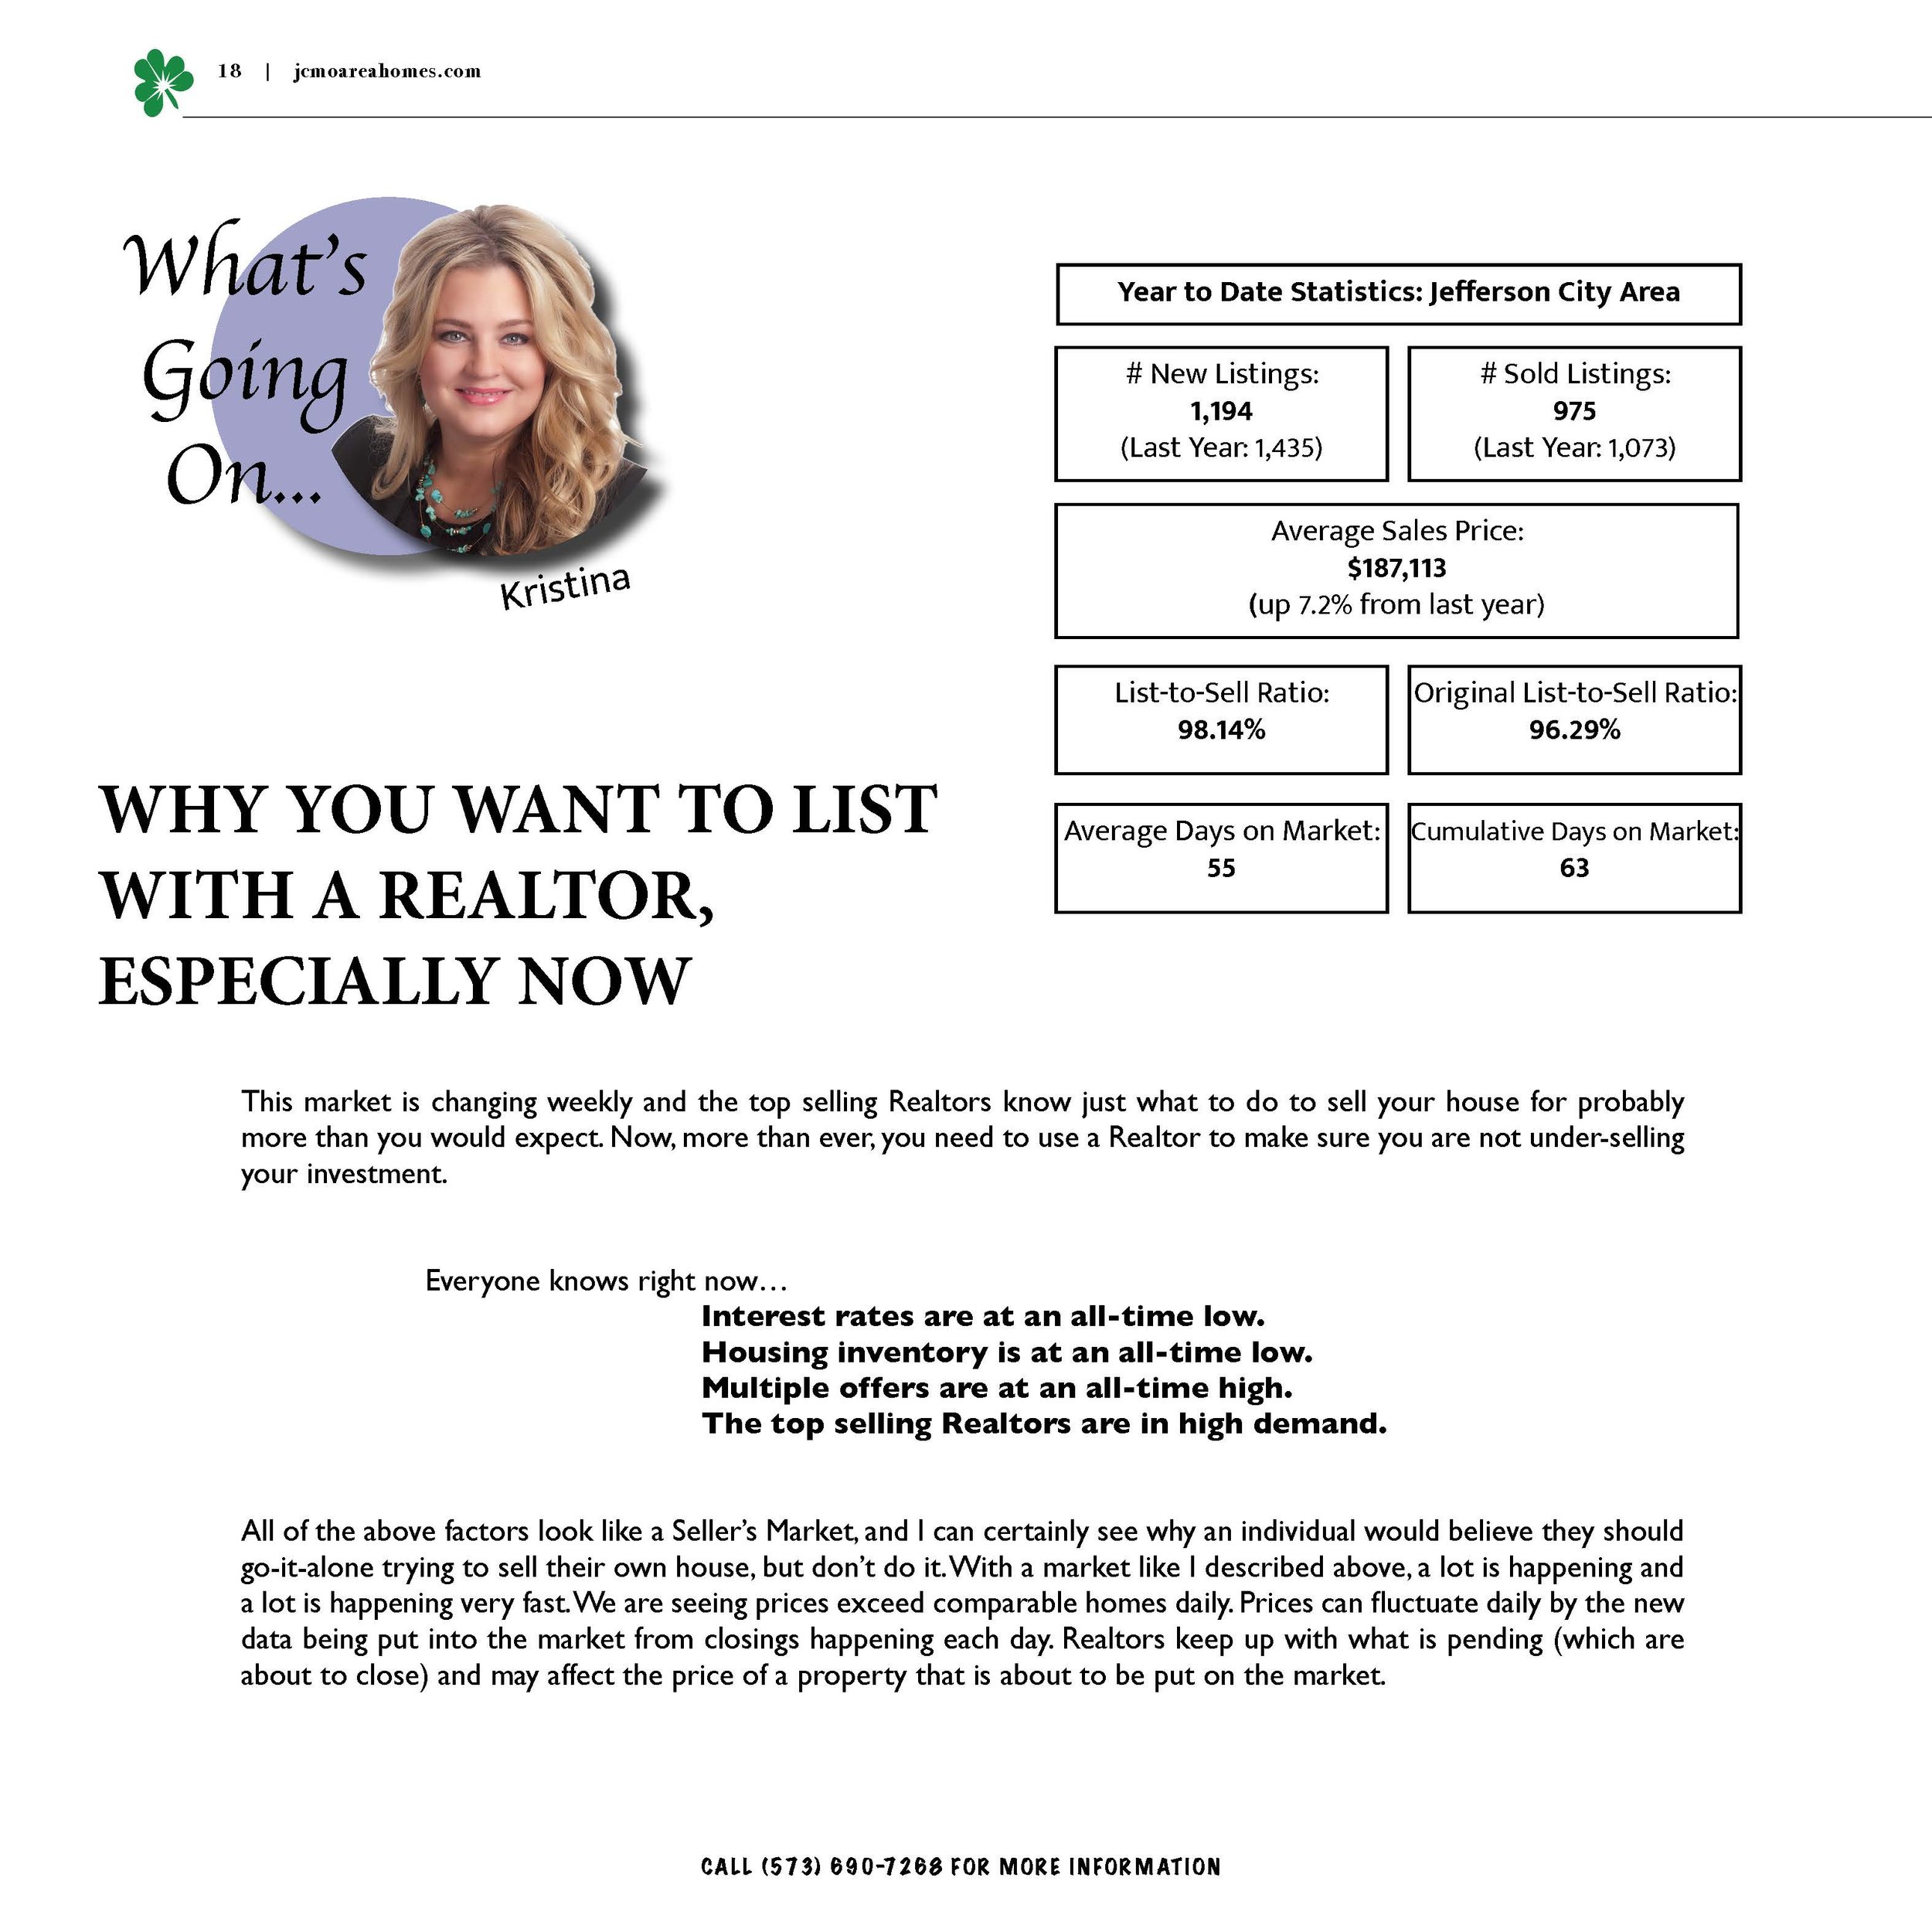 Why List with a Realtor